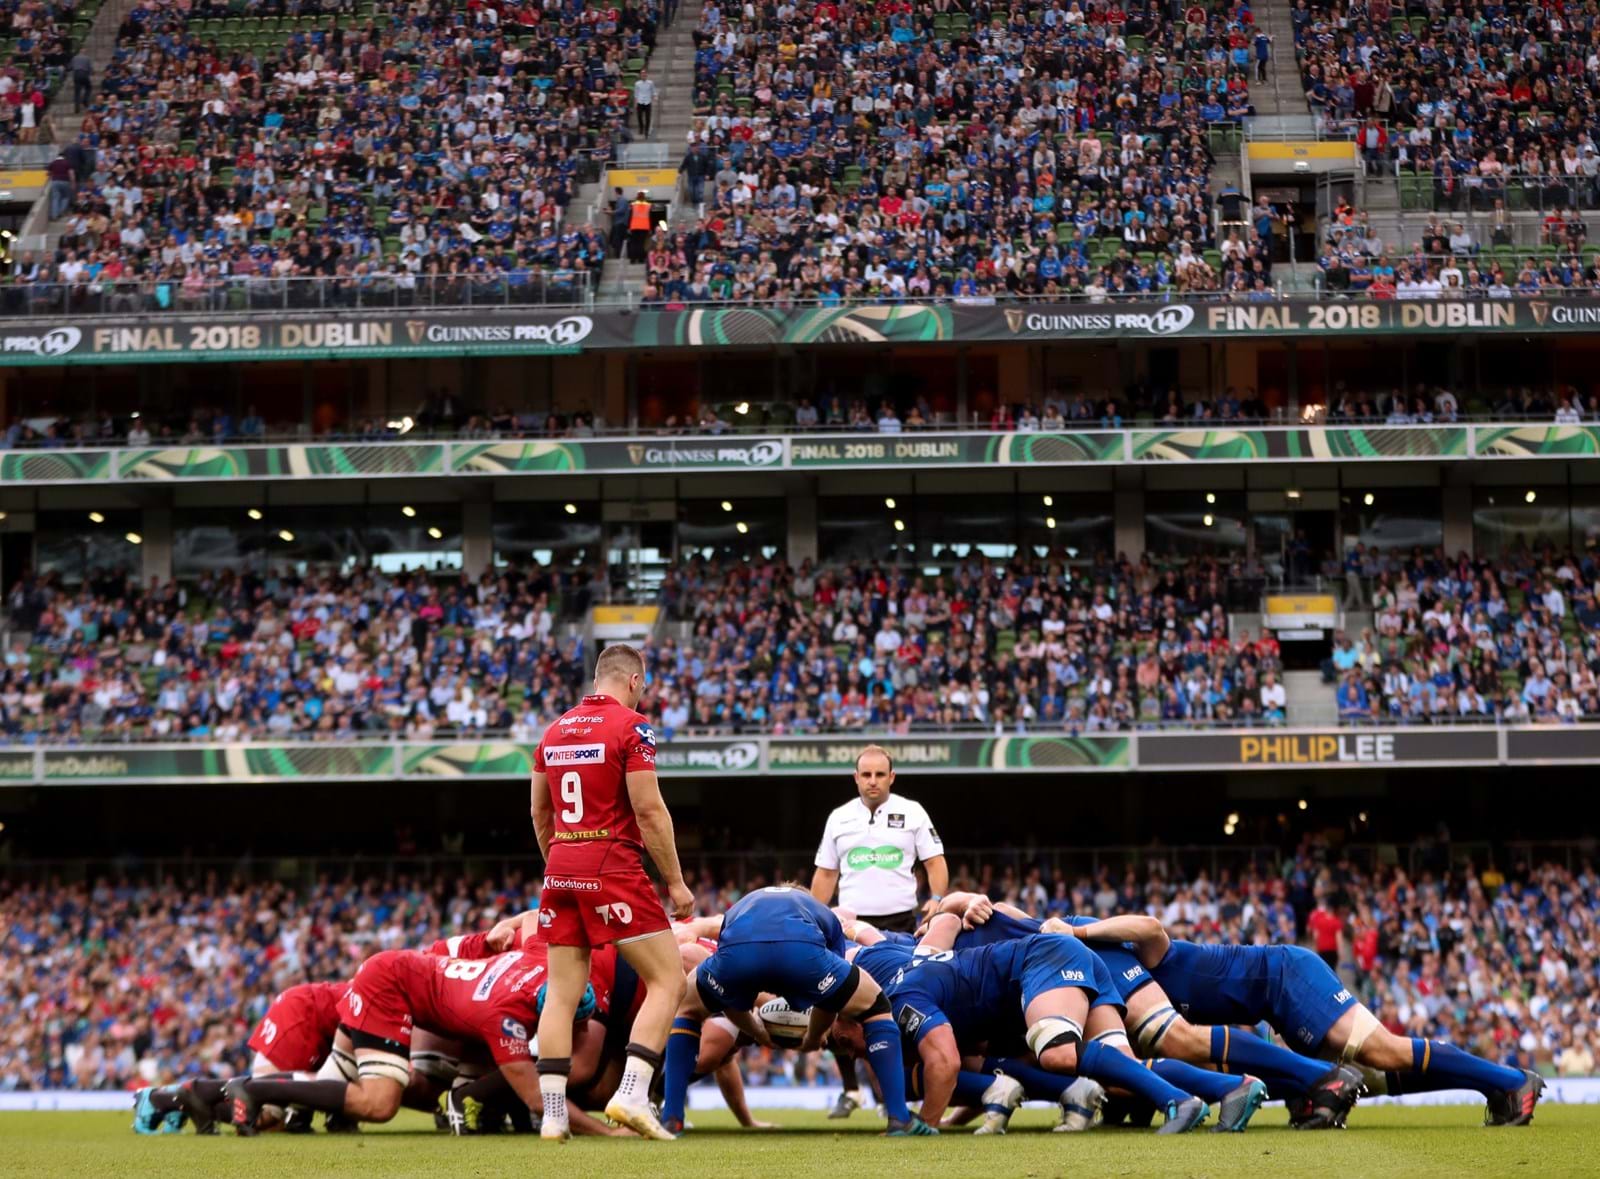 PREMIER SPORTS APPOINTS SUNSET+VINE TO PRODUCE GUINNESS PRO14 COVERAGE